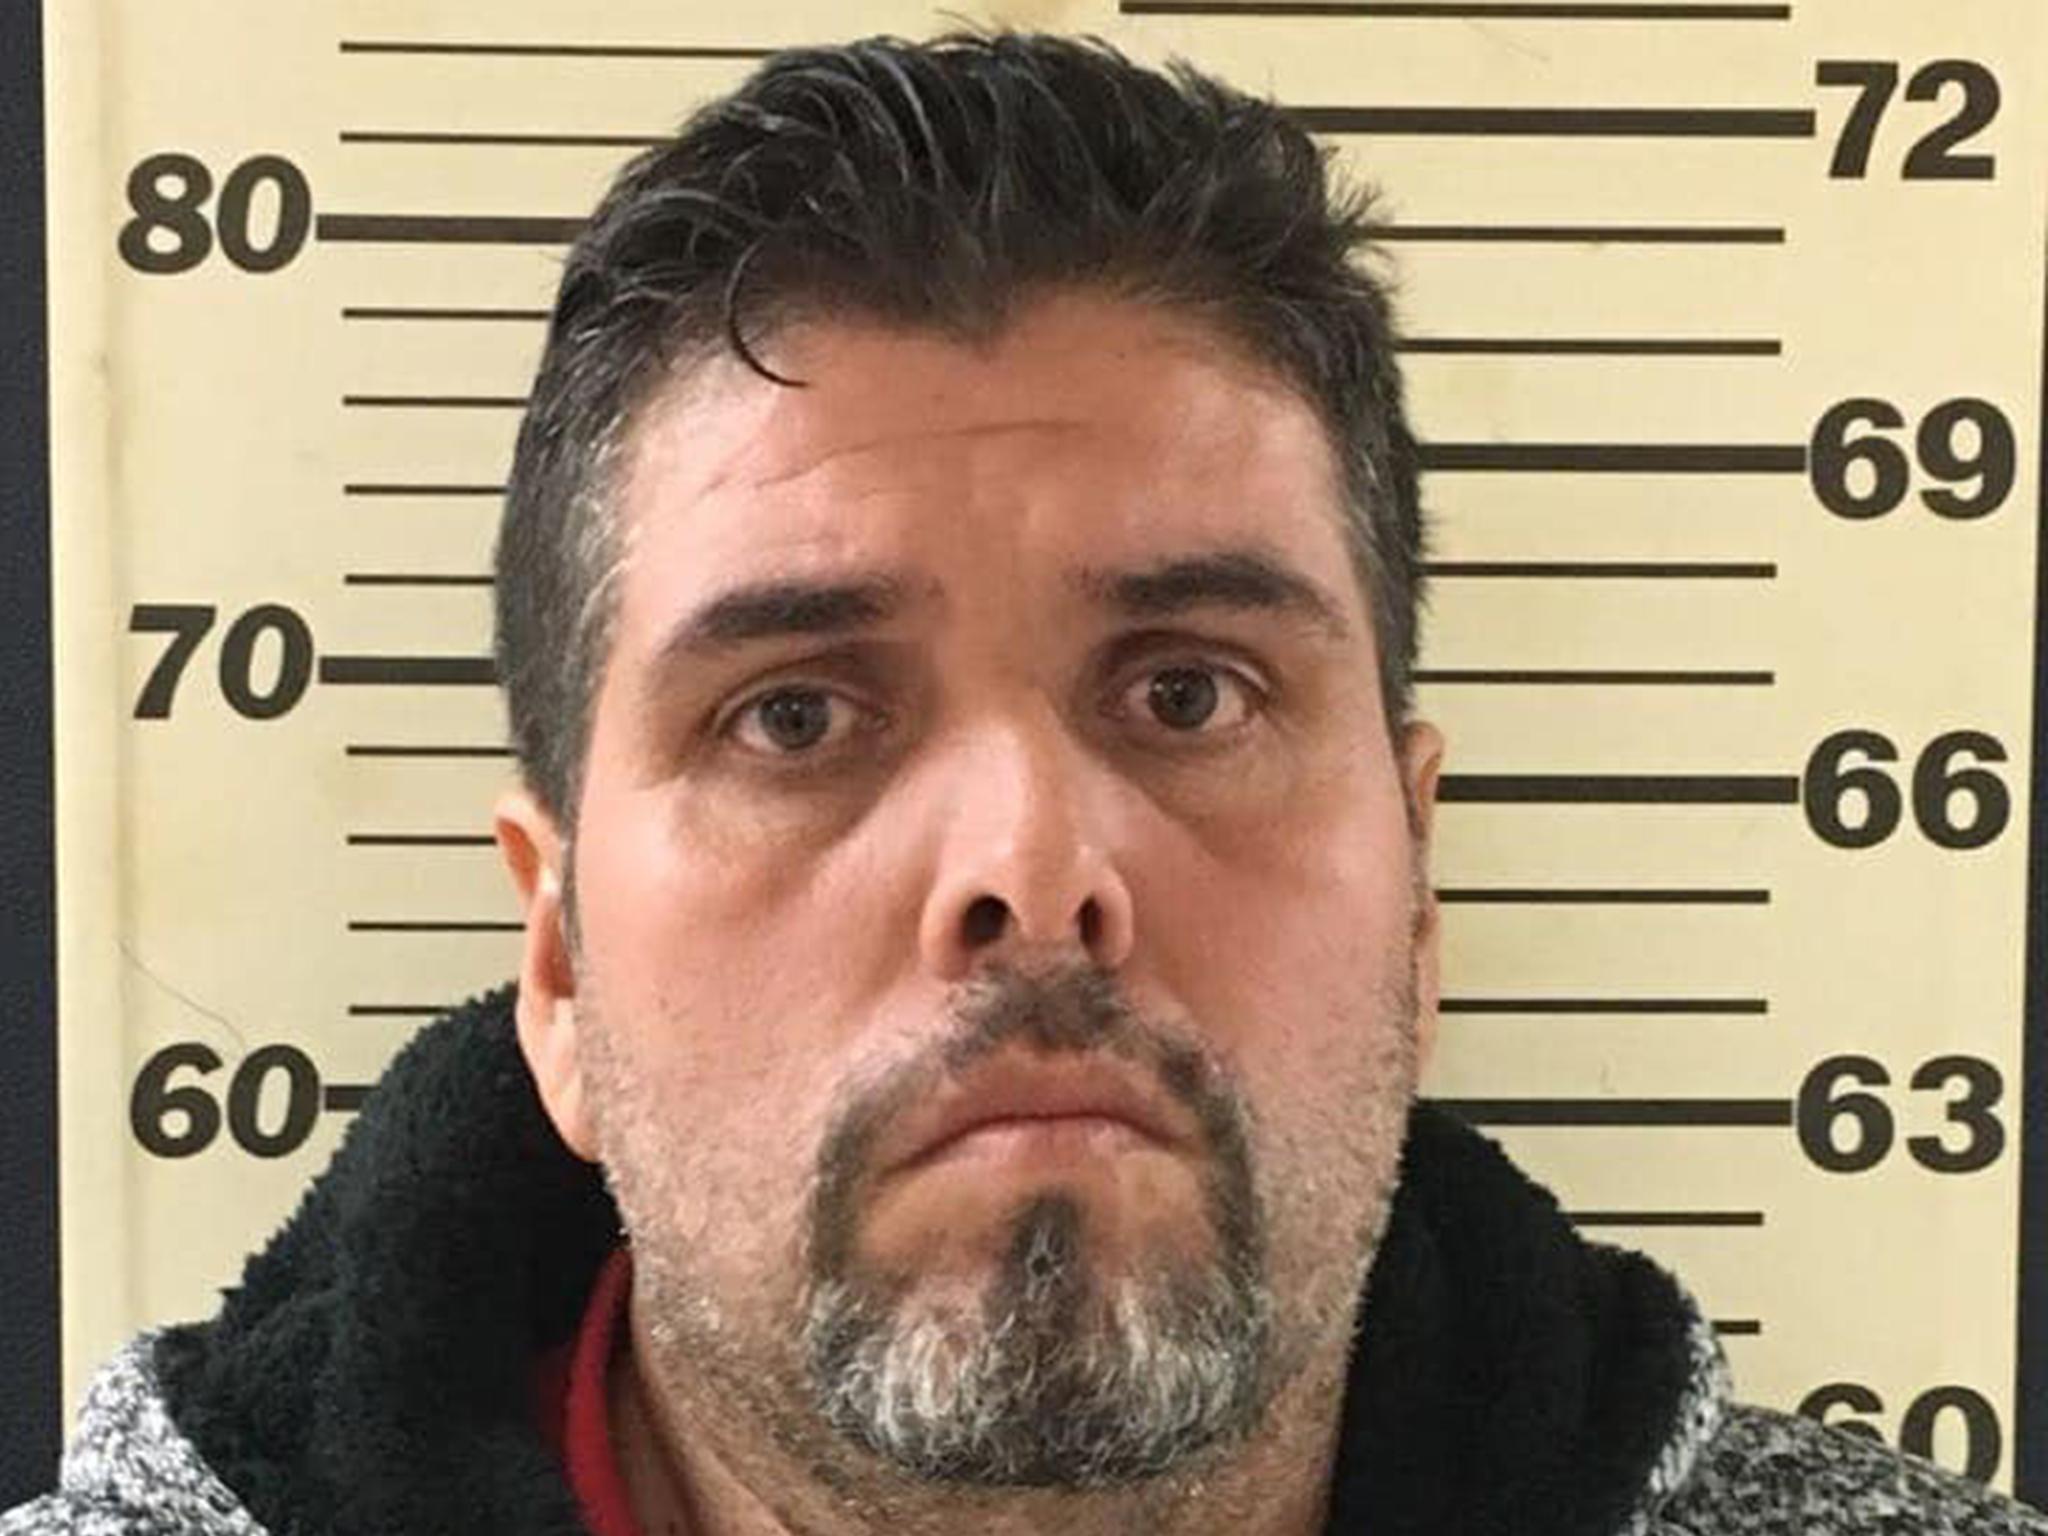 Francisco Quiroz-Zamora was apprehended during a sting operation late last year